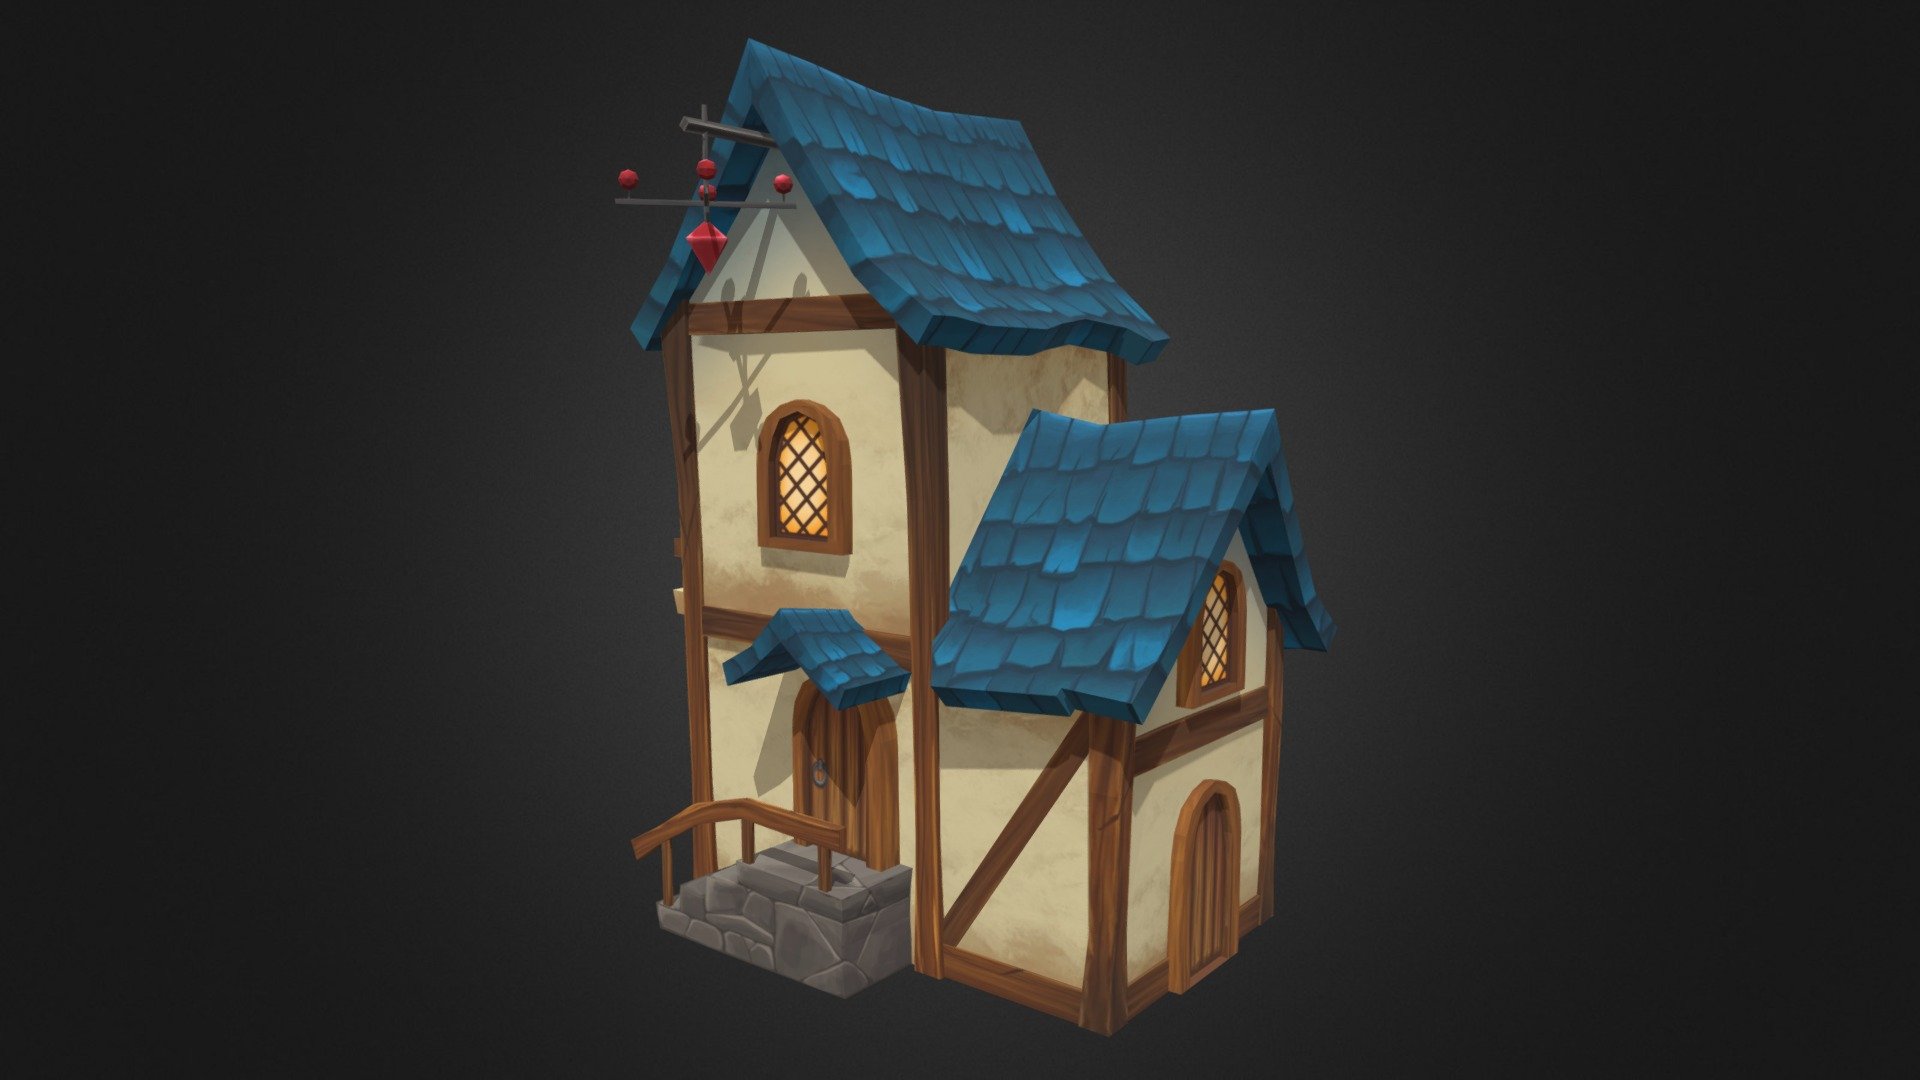 Hand Painted Fantasy House made in blender
Features:
Hand Painted
Diffuse texture
Mesh - 1984 Tris
Easy color customization
PNG format (2048px by 2048px)
Mobile ready
Tillable
Mobile and PBR ready
Fantasy House is a part of Stylized Fantasy Village ! - Fantasy House - Download Free 3D model by Aditya Graphical (@Adityakm) 3d model